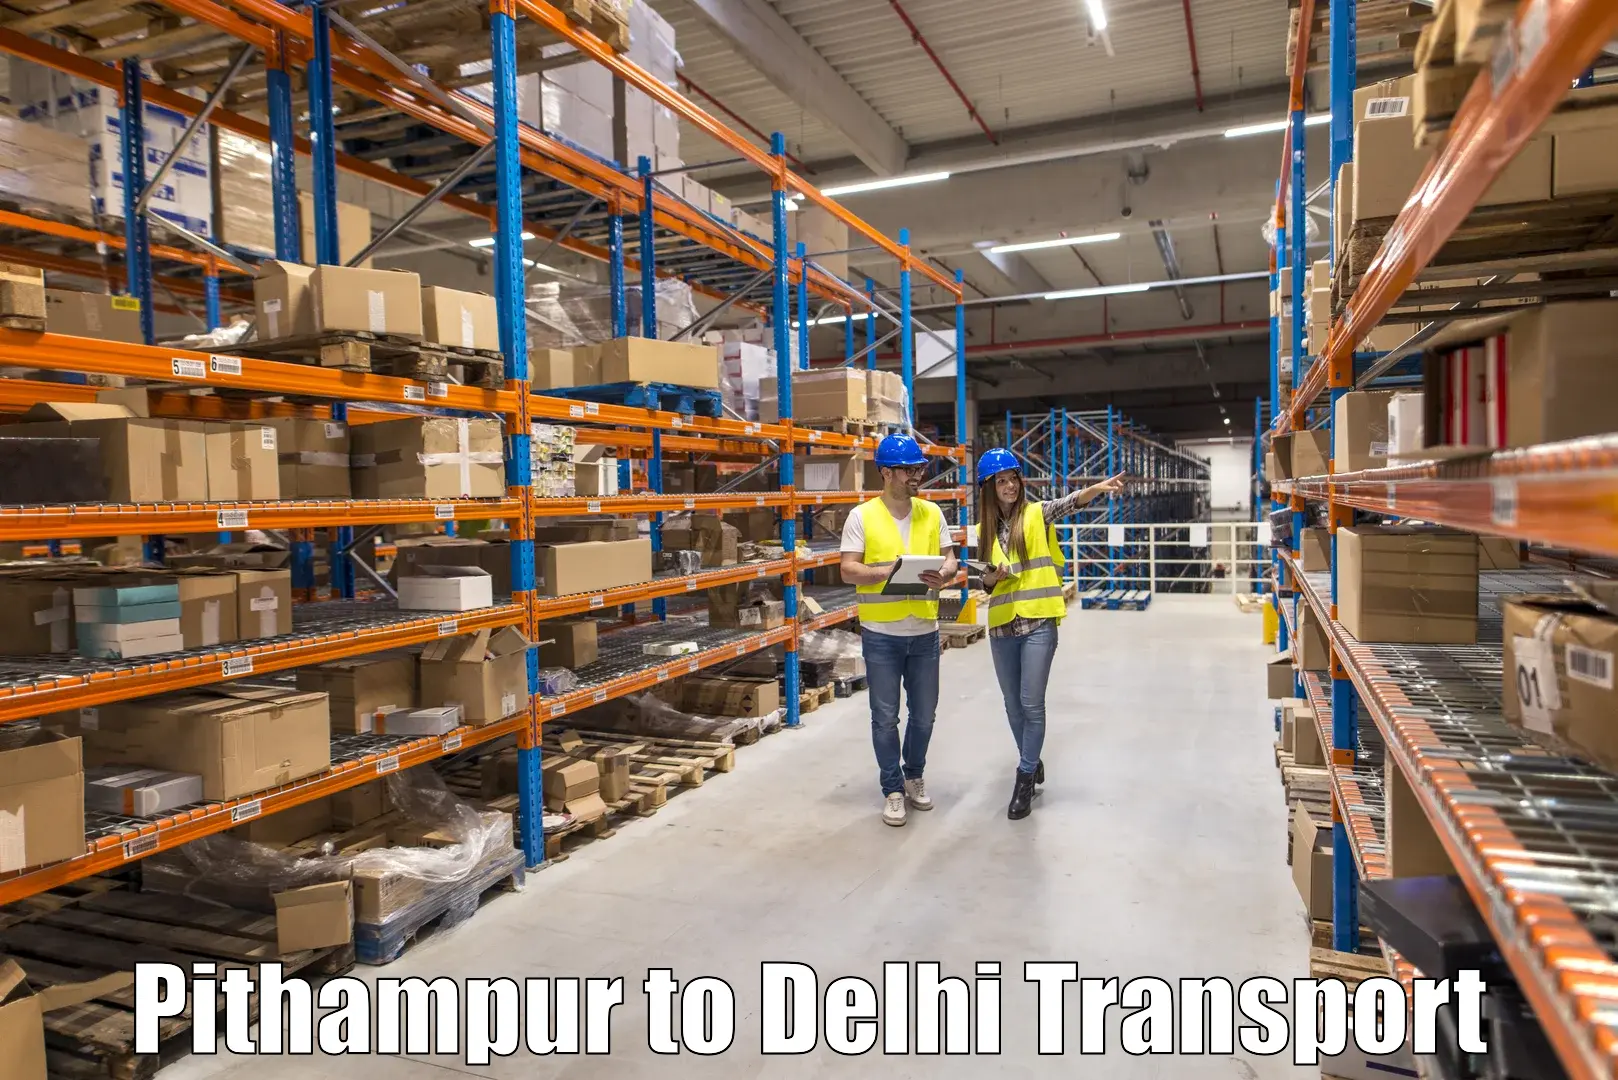 Transport in sharing Pithampur to IIT Delhi